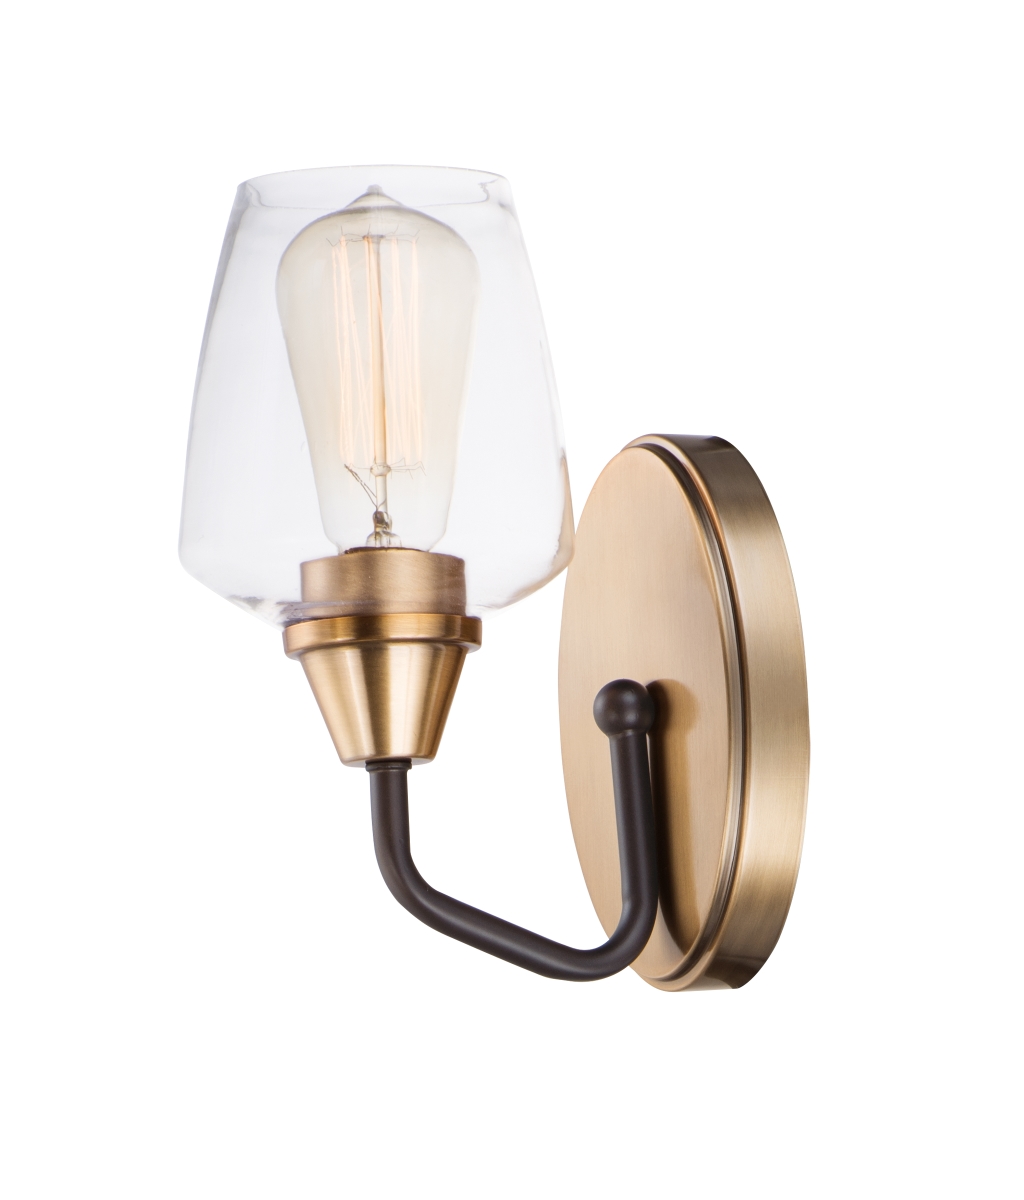 26121clbzab 5 In. Goblet One-light Wall Sconce, Bronze & Antique Brass